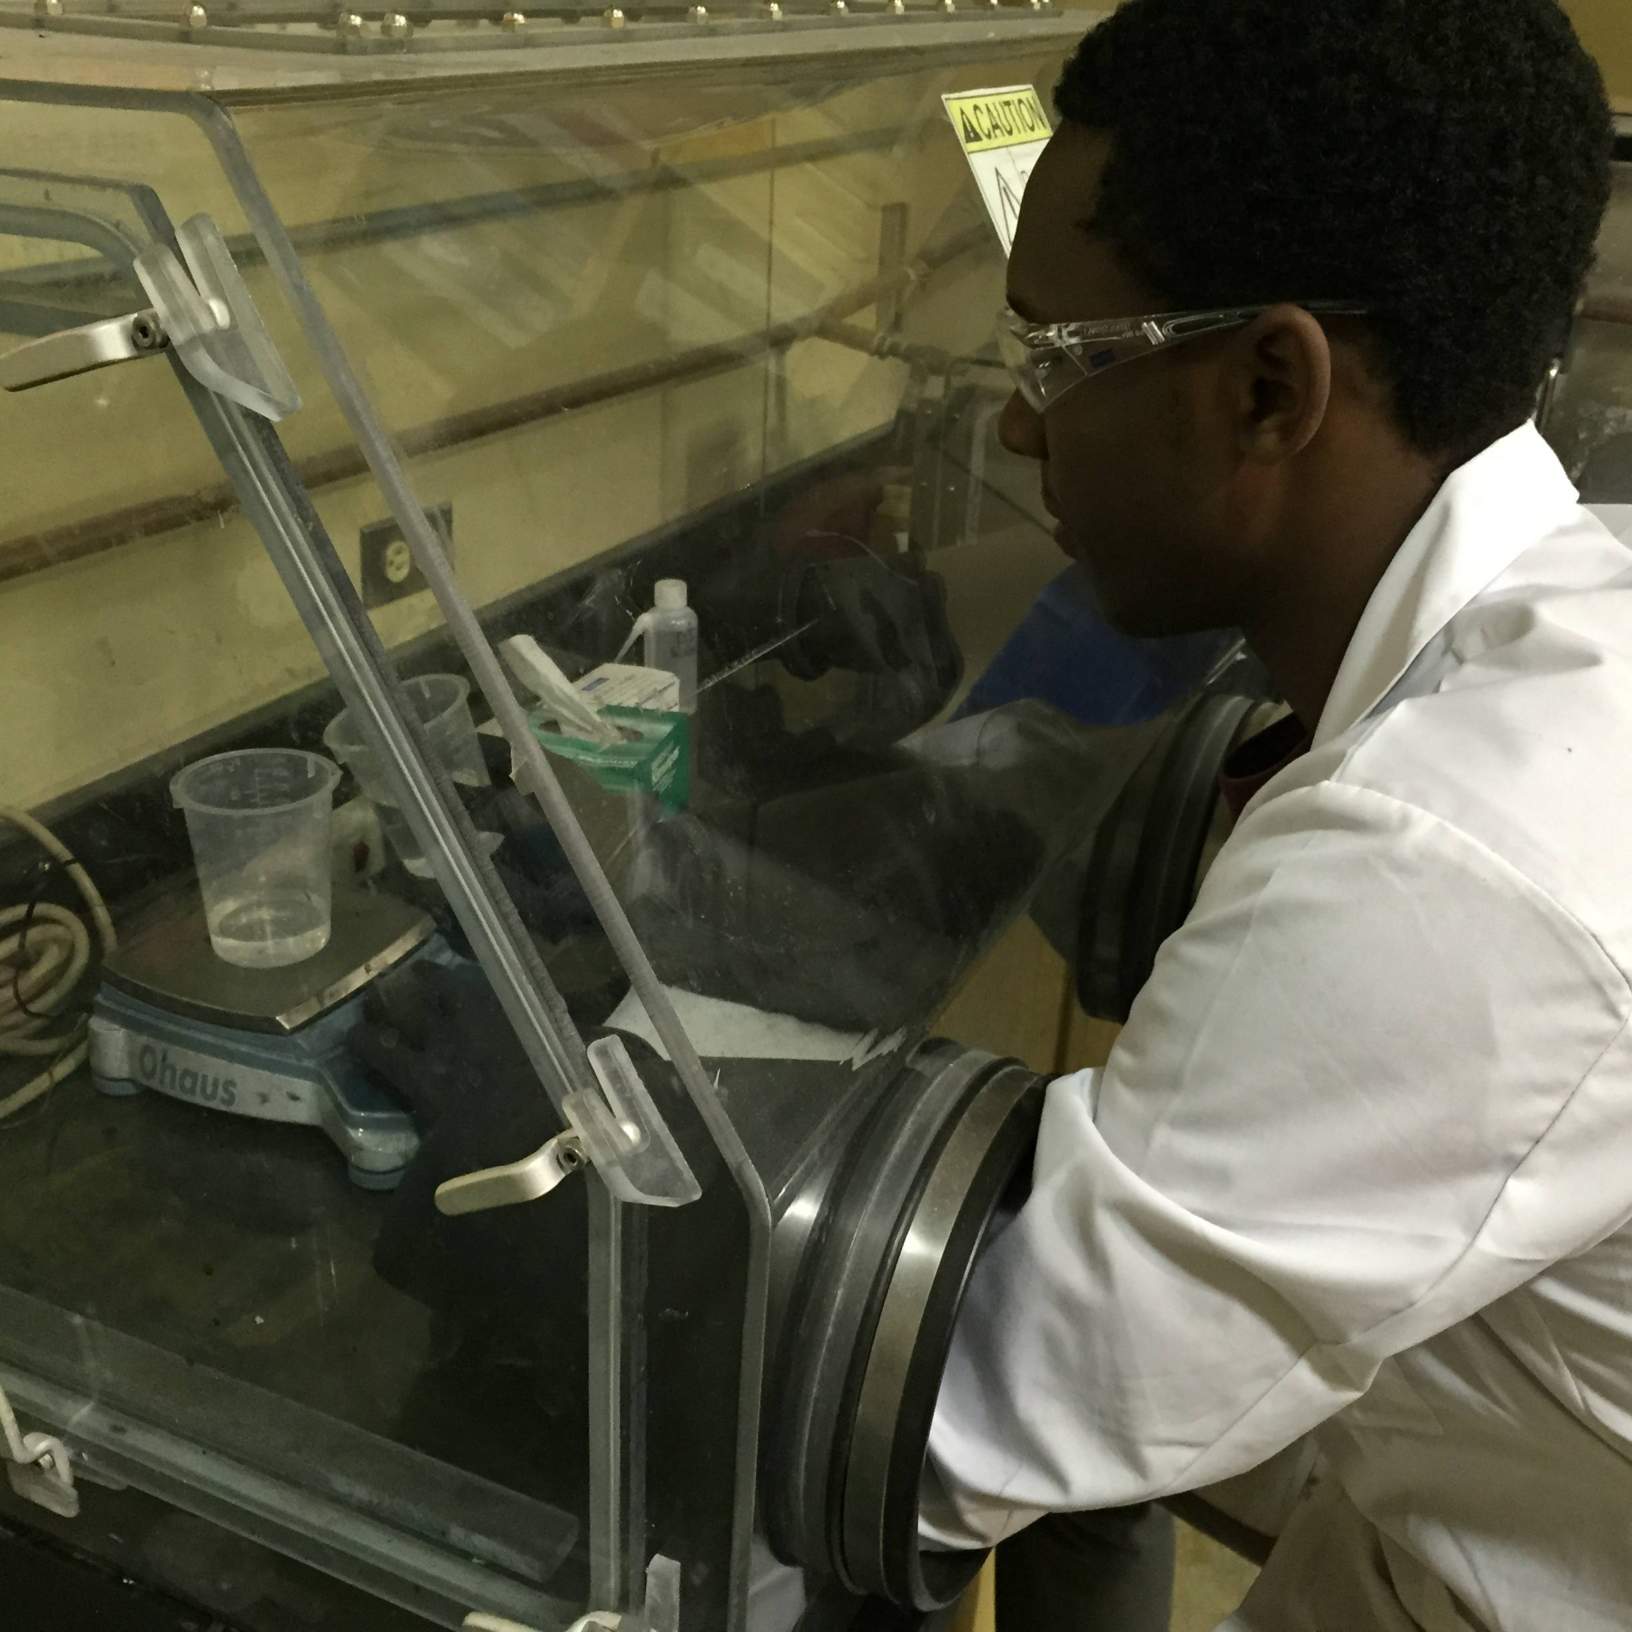 Daniel Slaughter working with nano-particles in a specialized glove box.